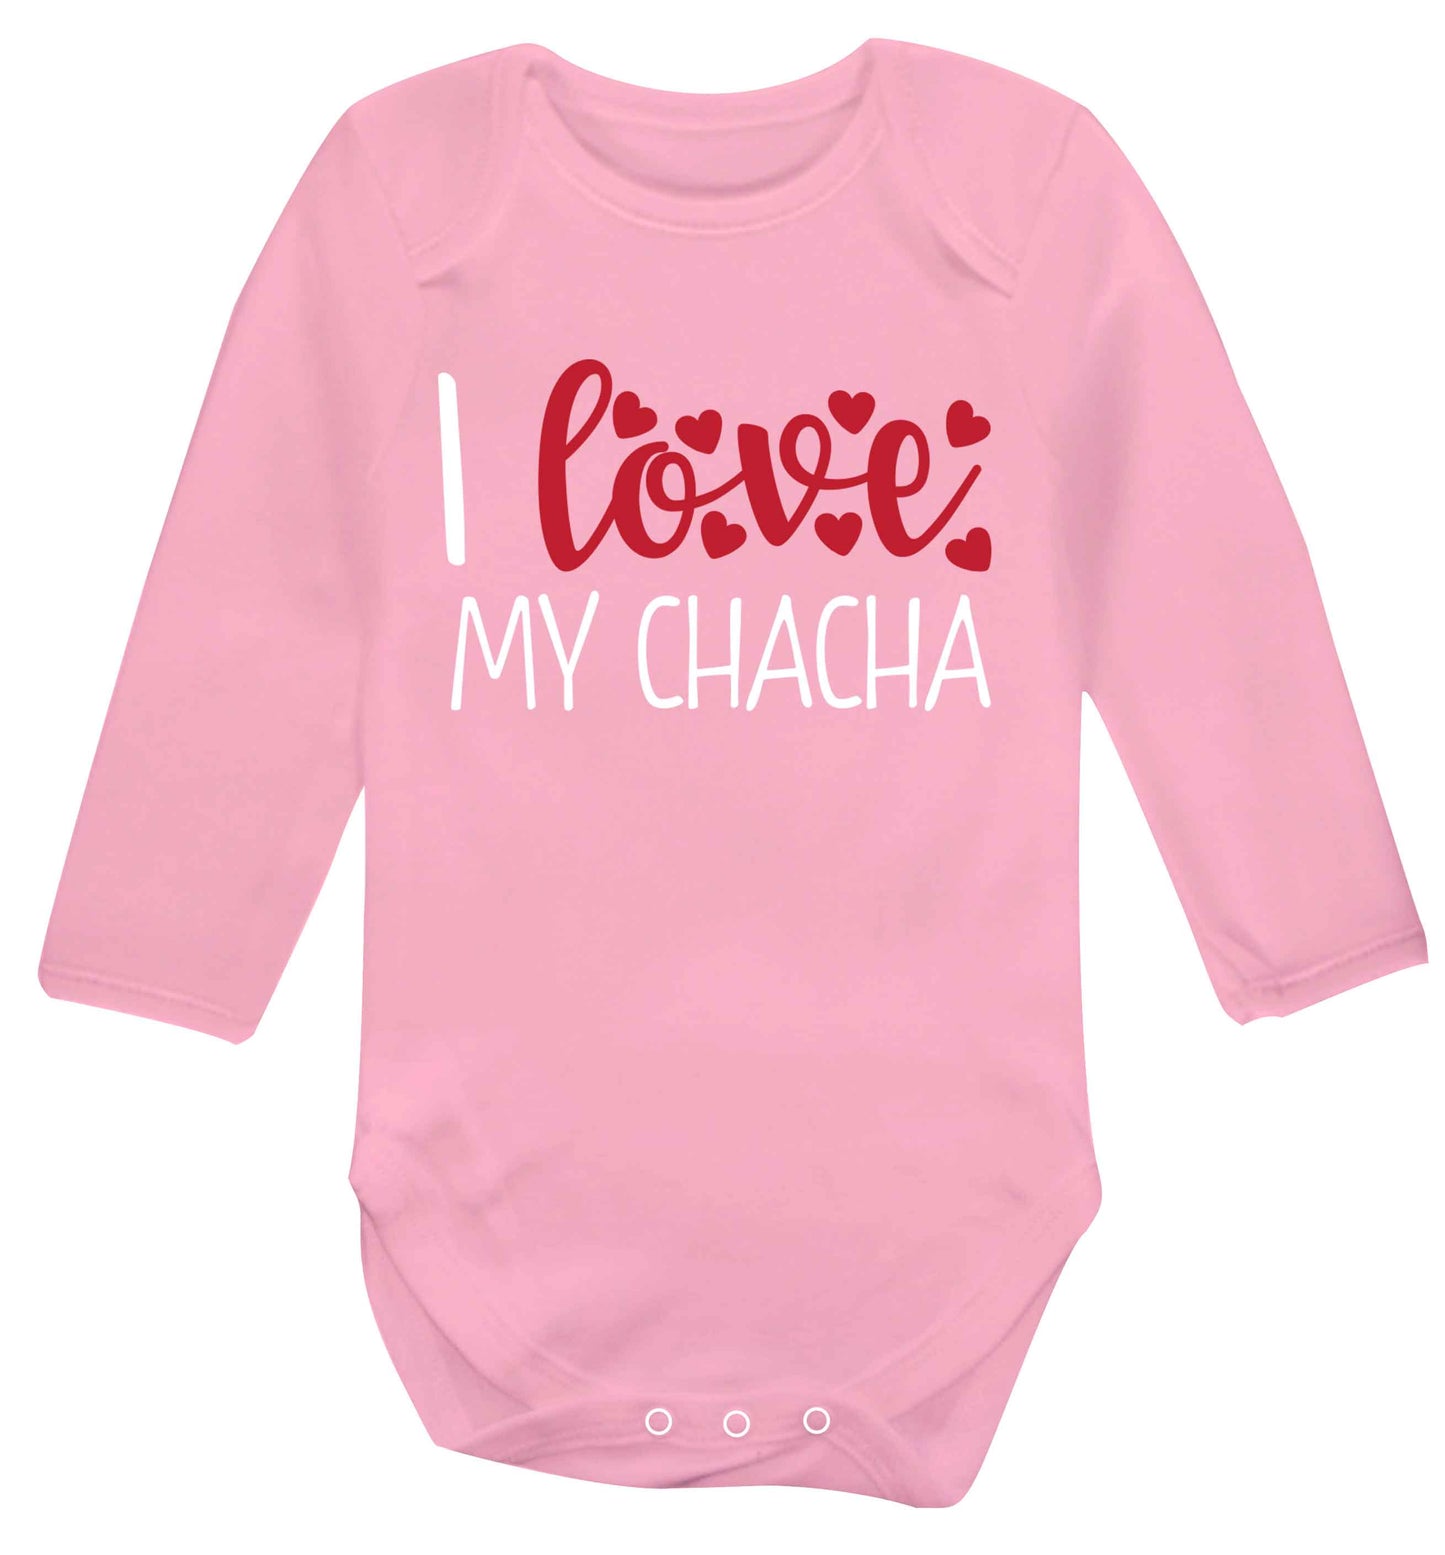 I love my chacha Baby Vest long sleeved pale pink 6-12 months